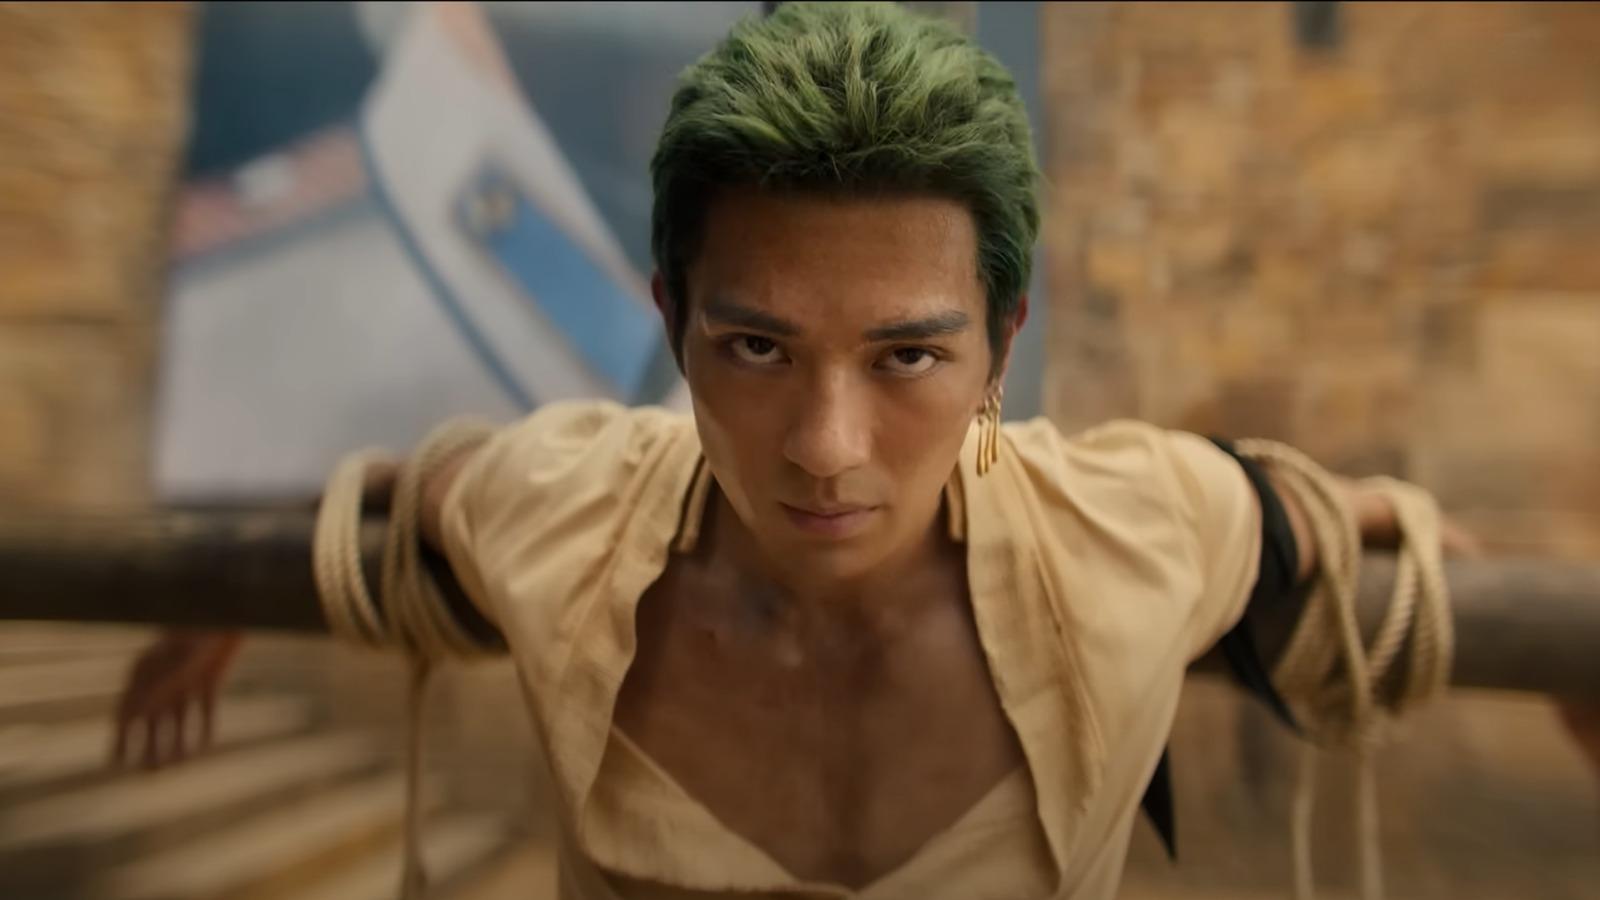 An image of Zoro from One Piece live-action